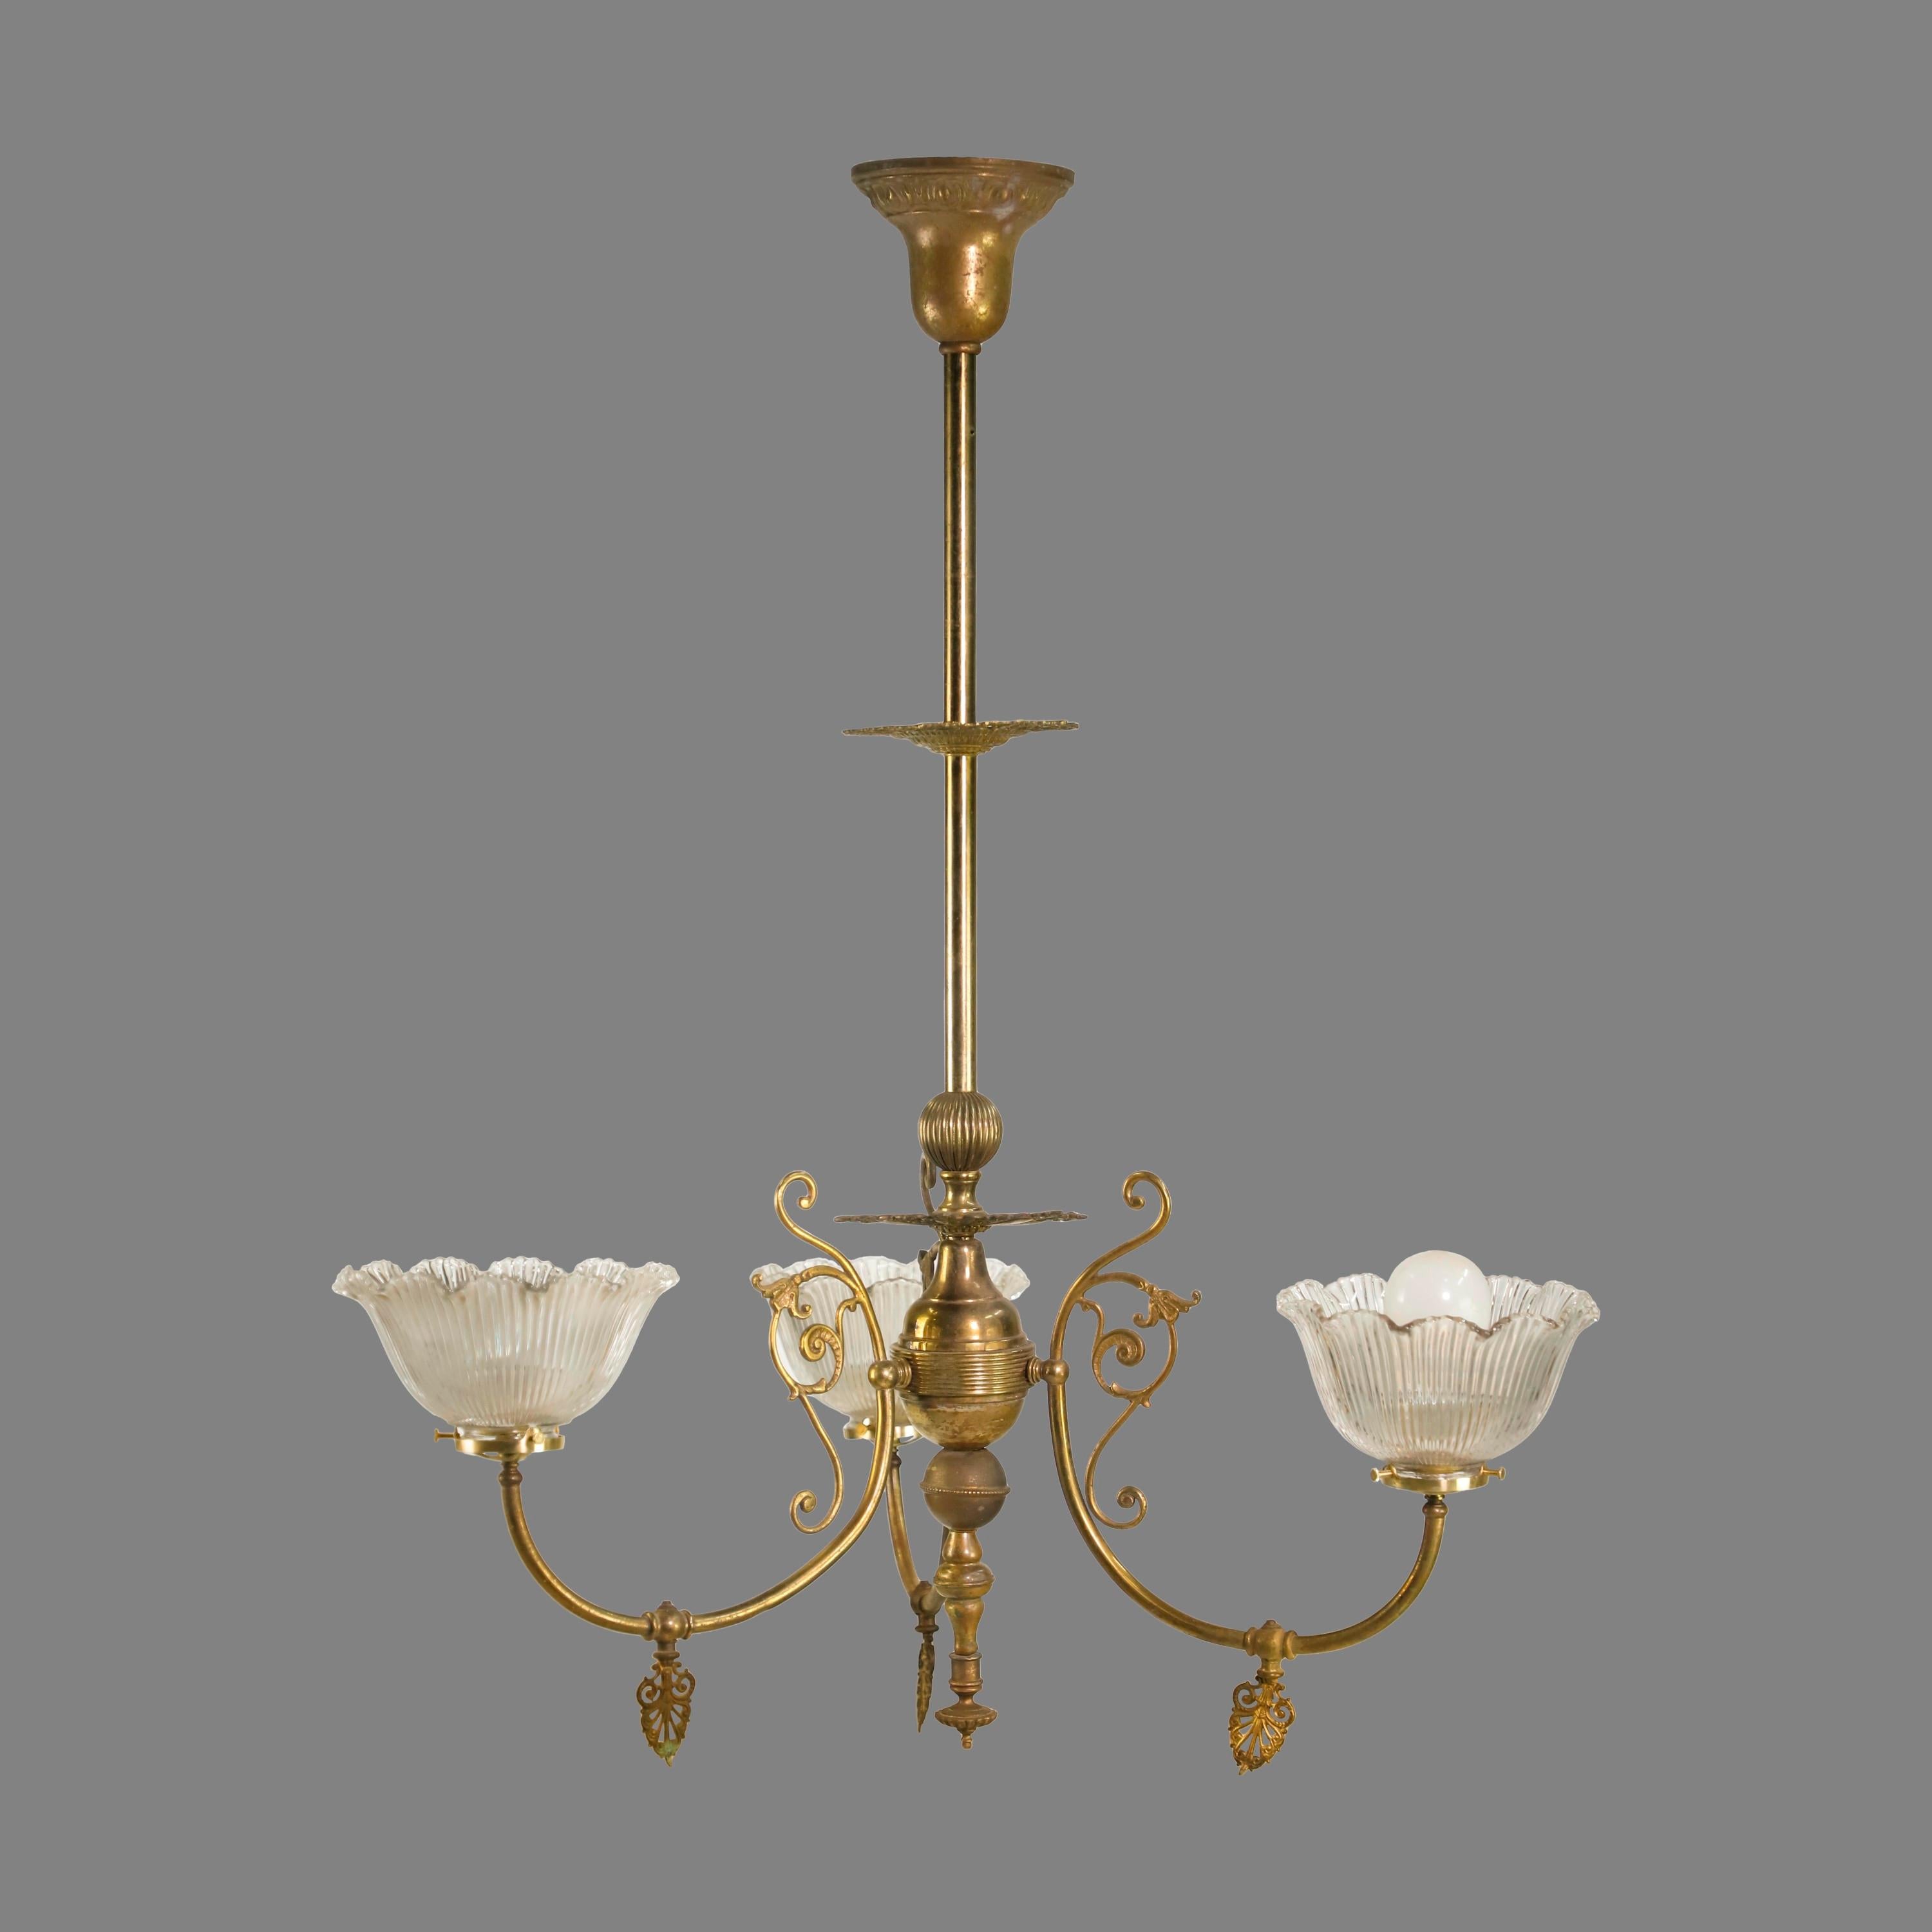 Turn of the century 3 arm chandelier. Made from brass. This light originally was powered by glass and has been converted to electric. Original period shades. Cleaned and restored. Please note, this item is located in our Scranton, PA location.